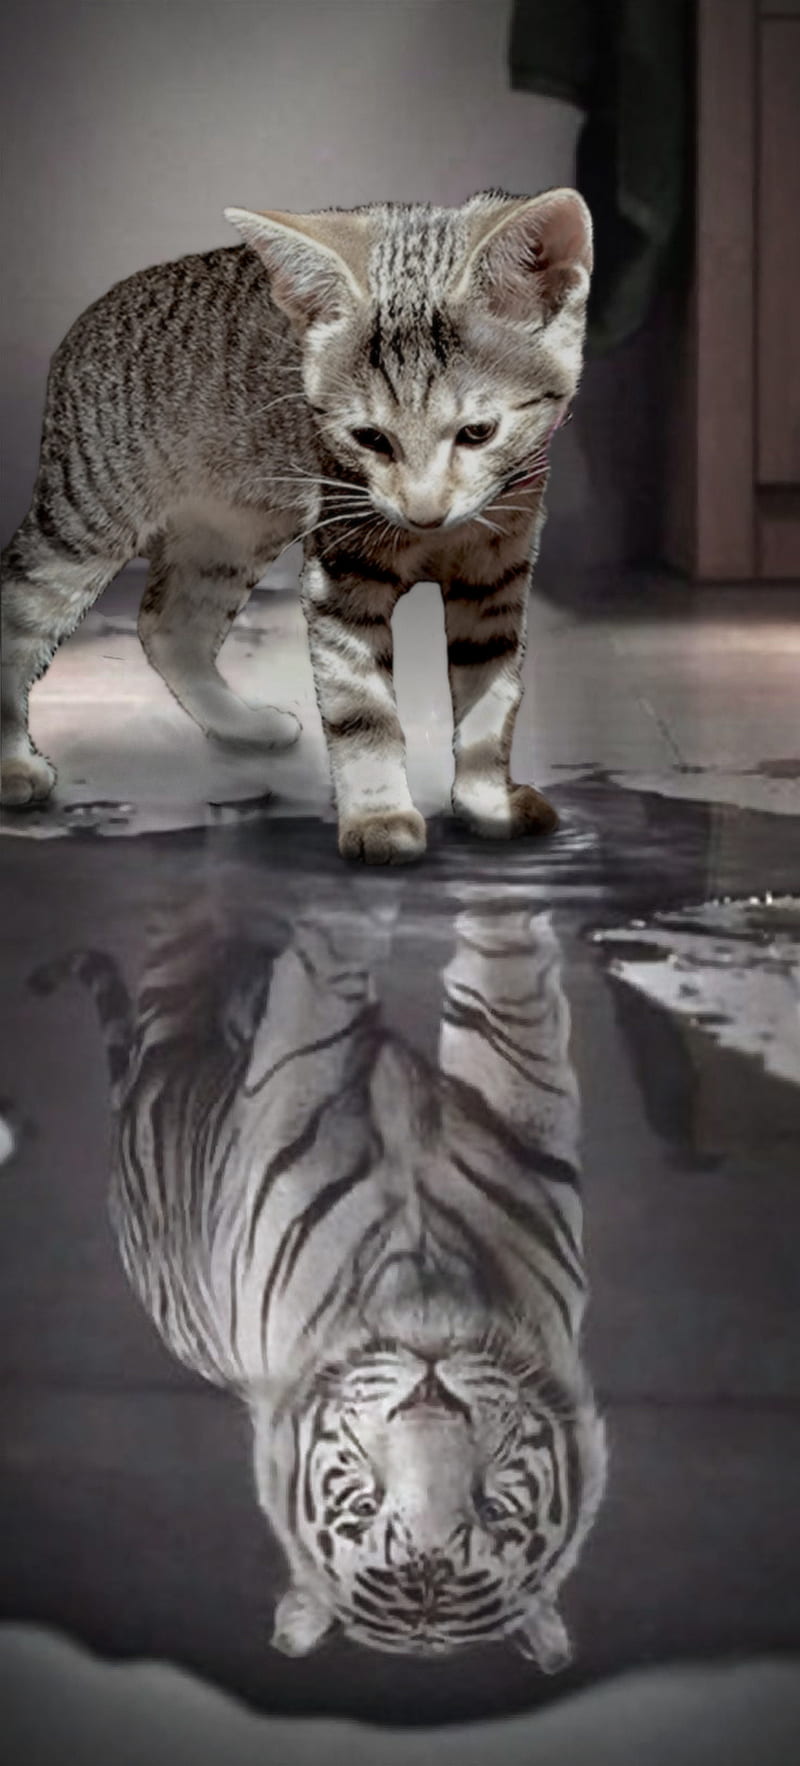 Tiger reflection, animal, black and white, cat, cute, kitten, HD phone wallpaper